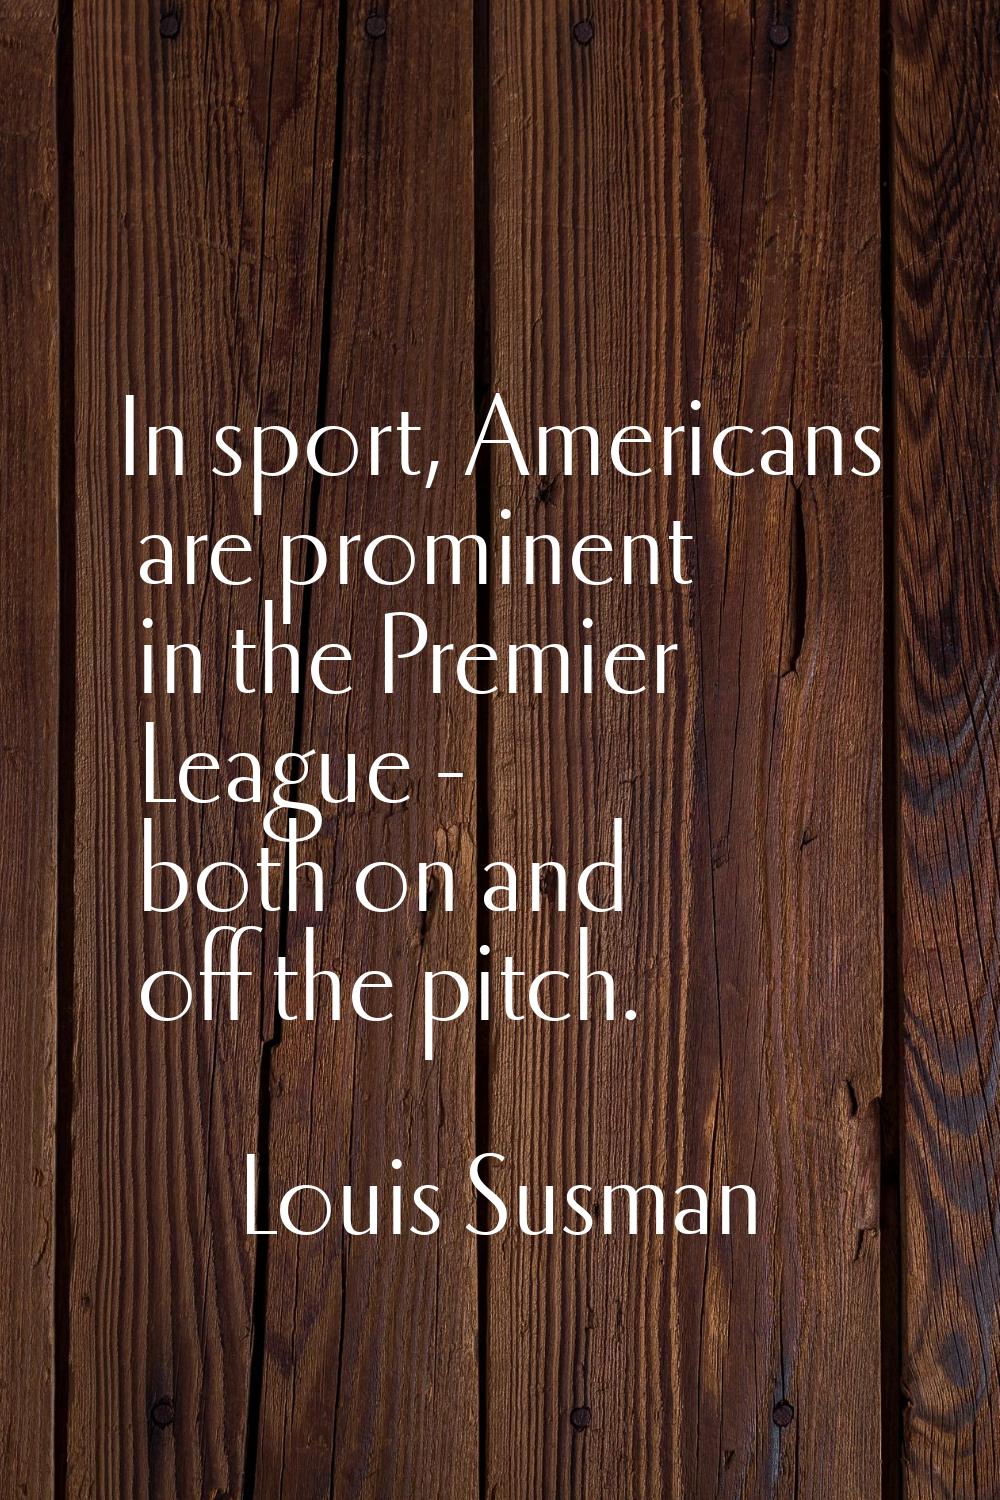 In sport, Americans are prominent in the Premier League - both on and off the pitch.